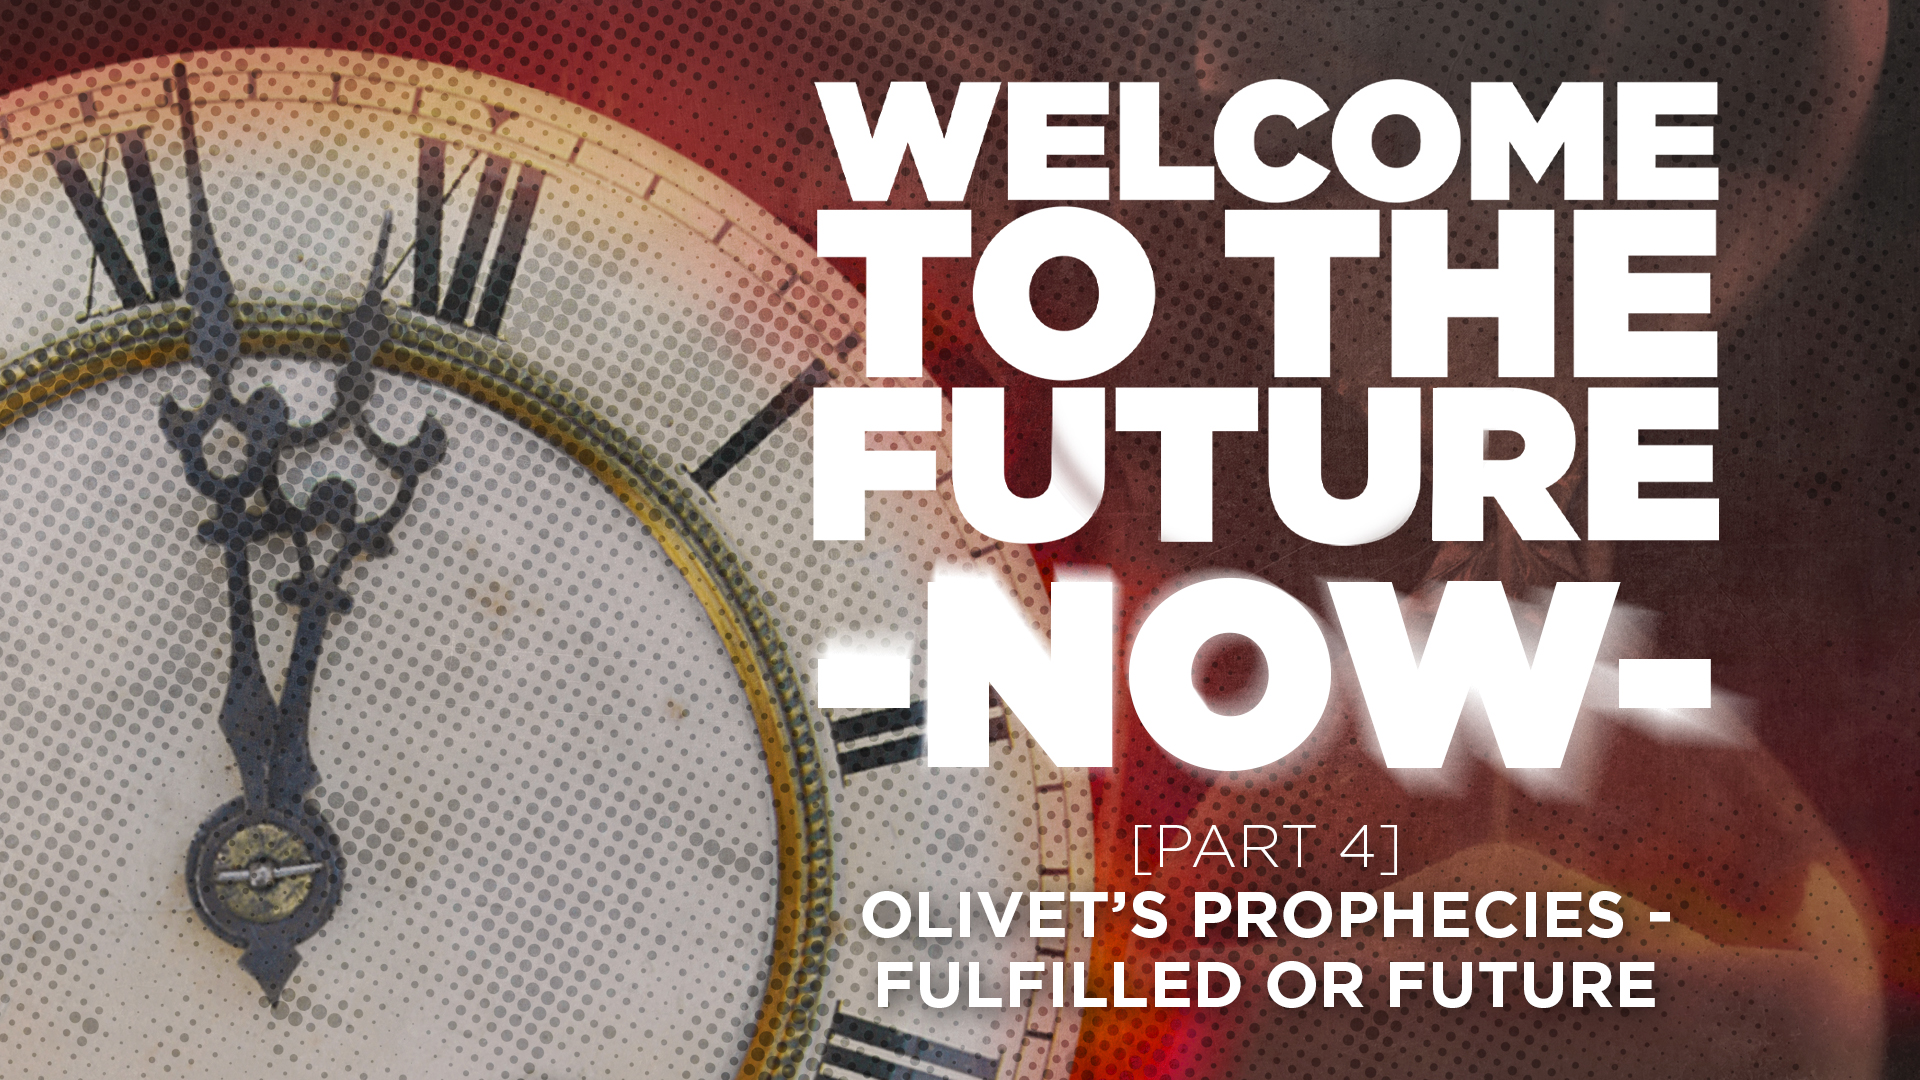 Part 4: Olivet's Prophecies - Fulfilled Or Future